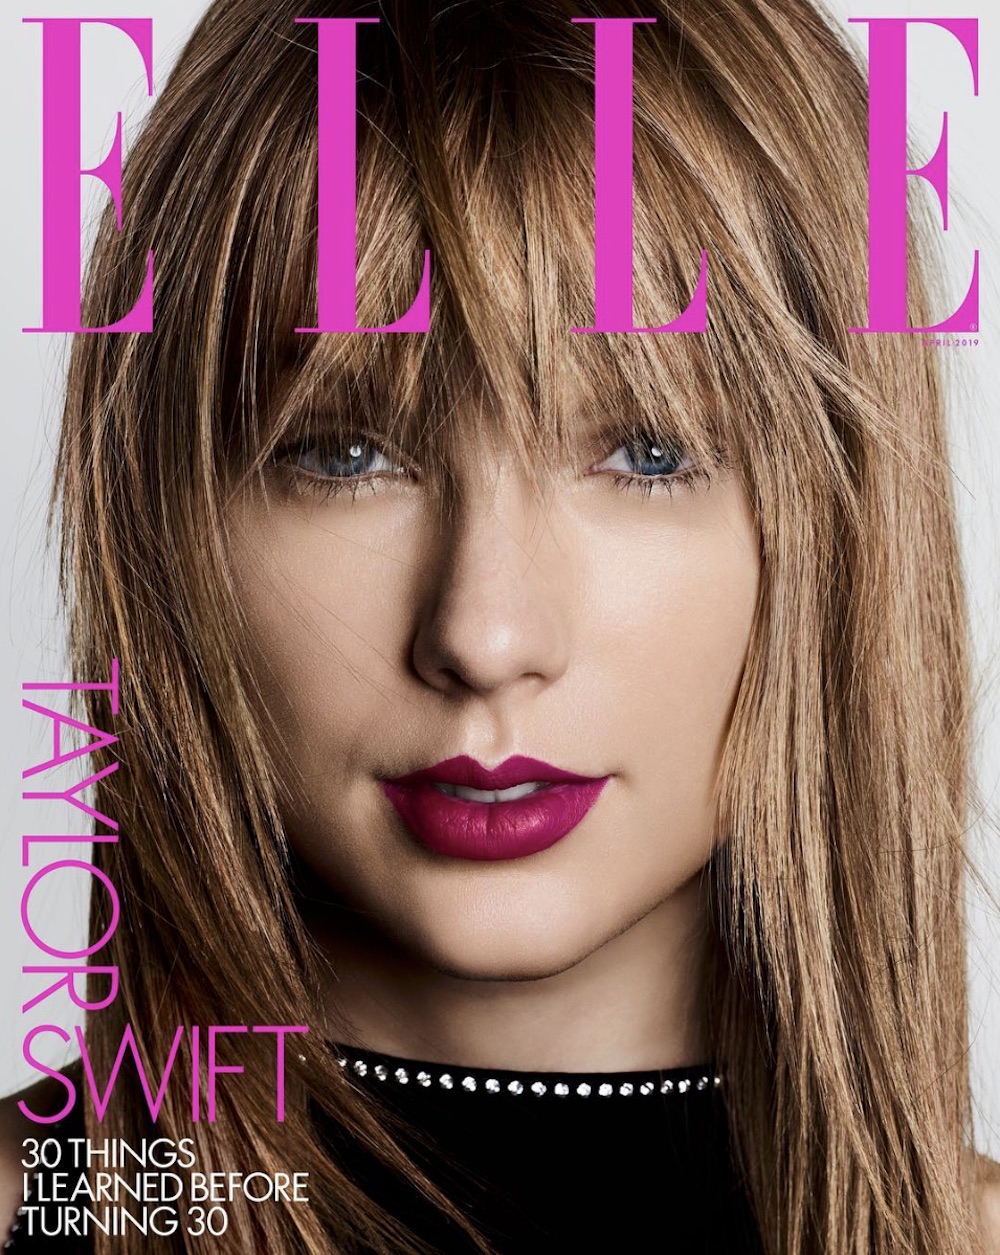 『ELLE』の表紙を飾ったテイラー・スウィフト（画像は『ELLE Magazine　2019年3月6日付Instagram「Ahead of her 30th birthday, Taylor Swift is sharing 30 things she learned before turning 30.」』のスクリーンショット）